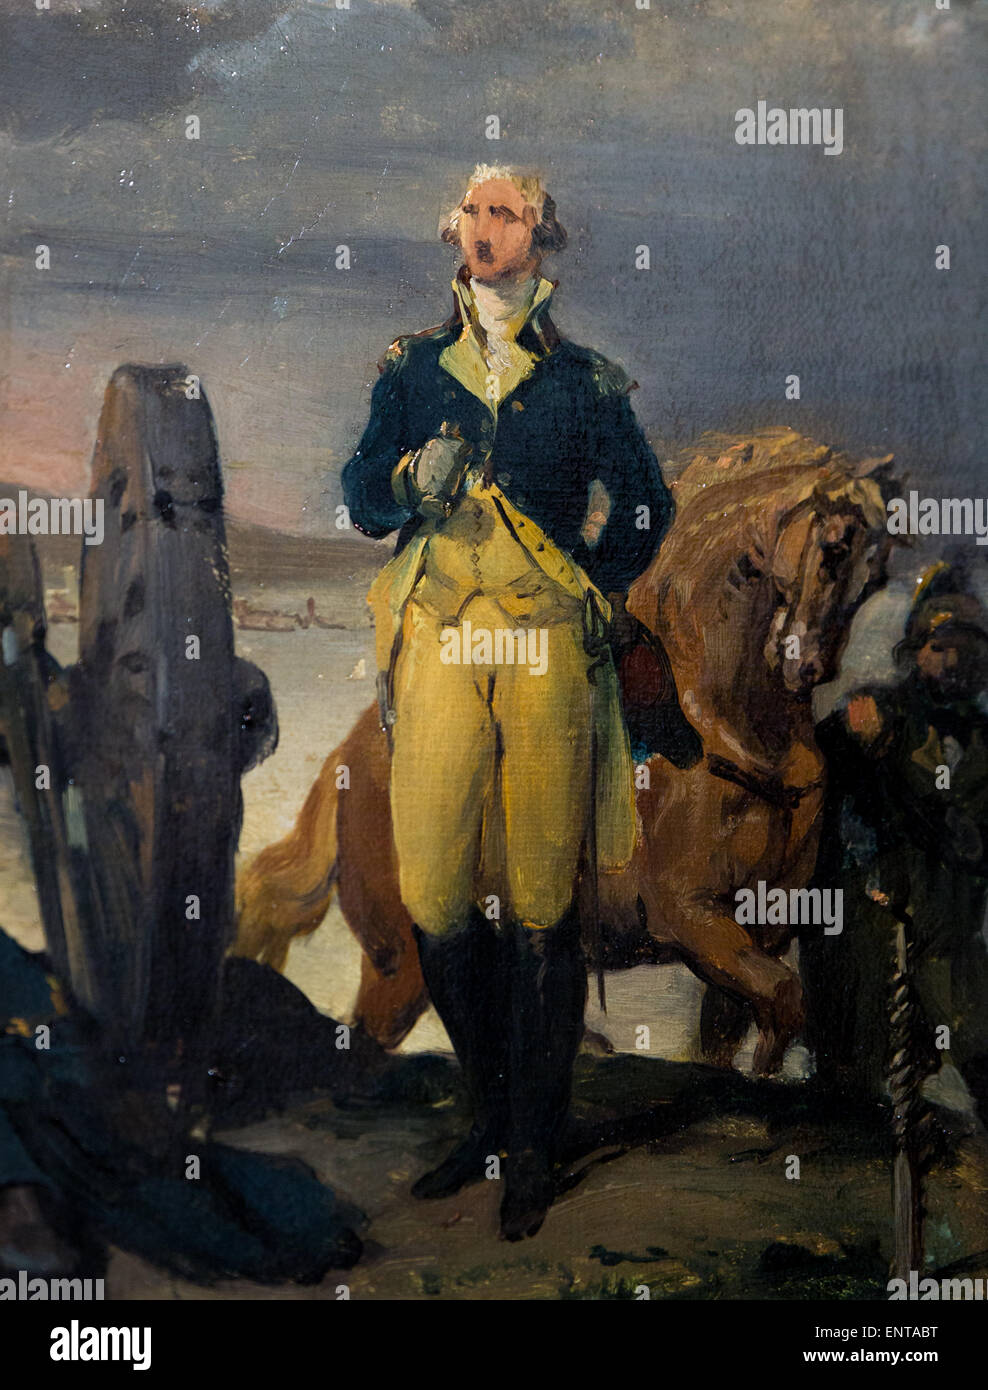 ActiveMuseum 0005946.jpg / General Foy in battle of Orthez 27 february 1814 05/12/2013  -   / 18th century Collection / Active Museum Stock Photo